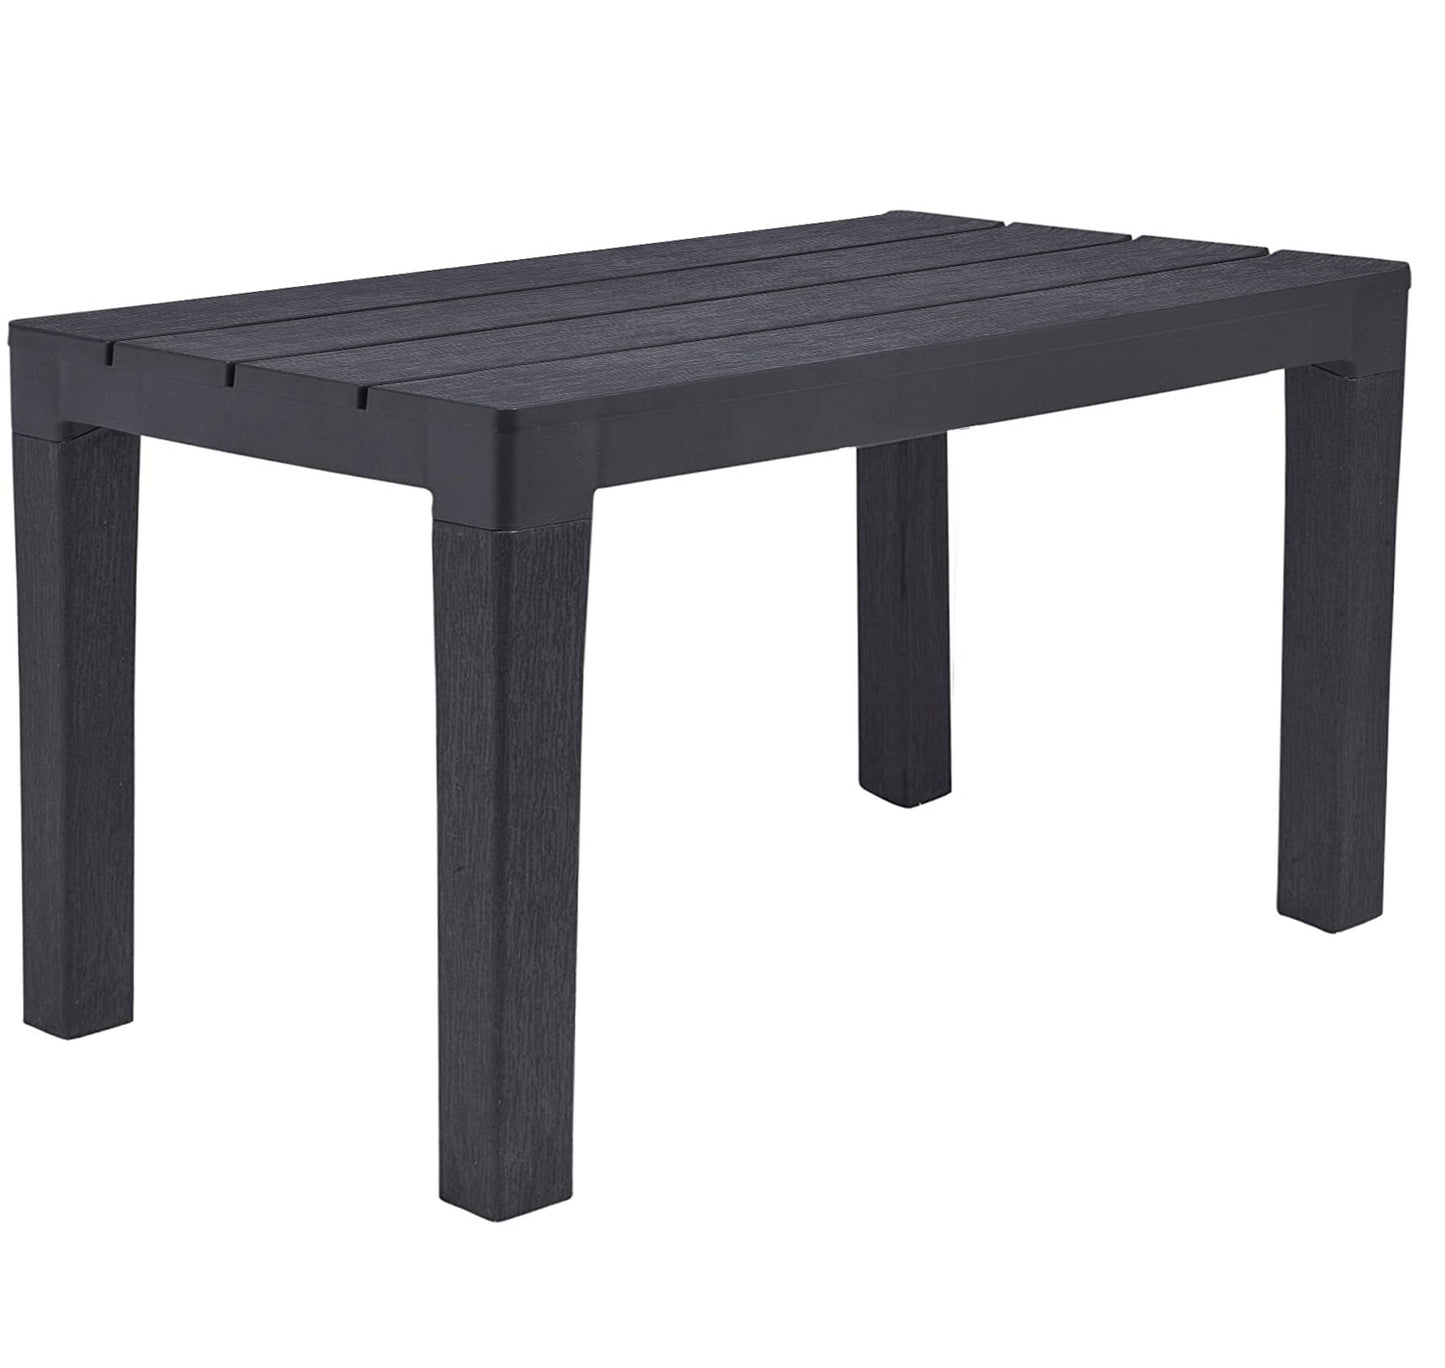 Plastic Garden Coffee Table Anthracite Outdoor Furniture